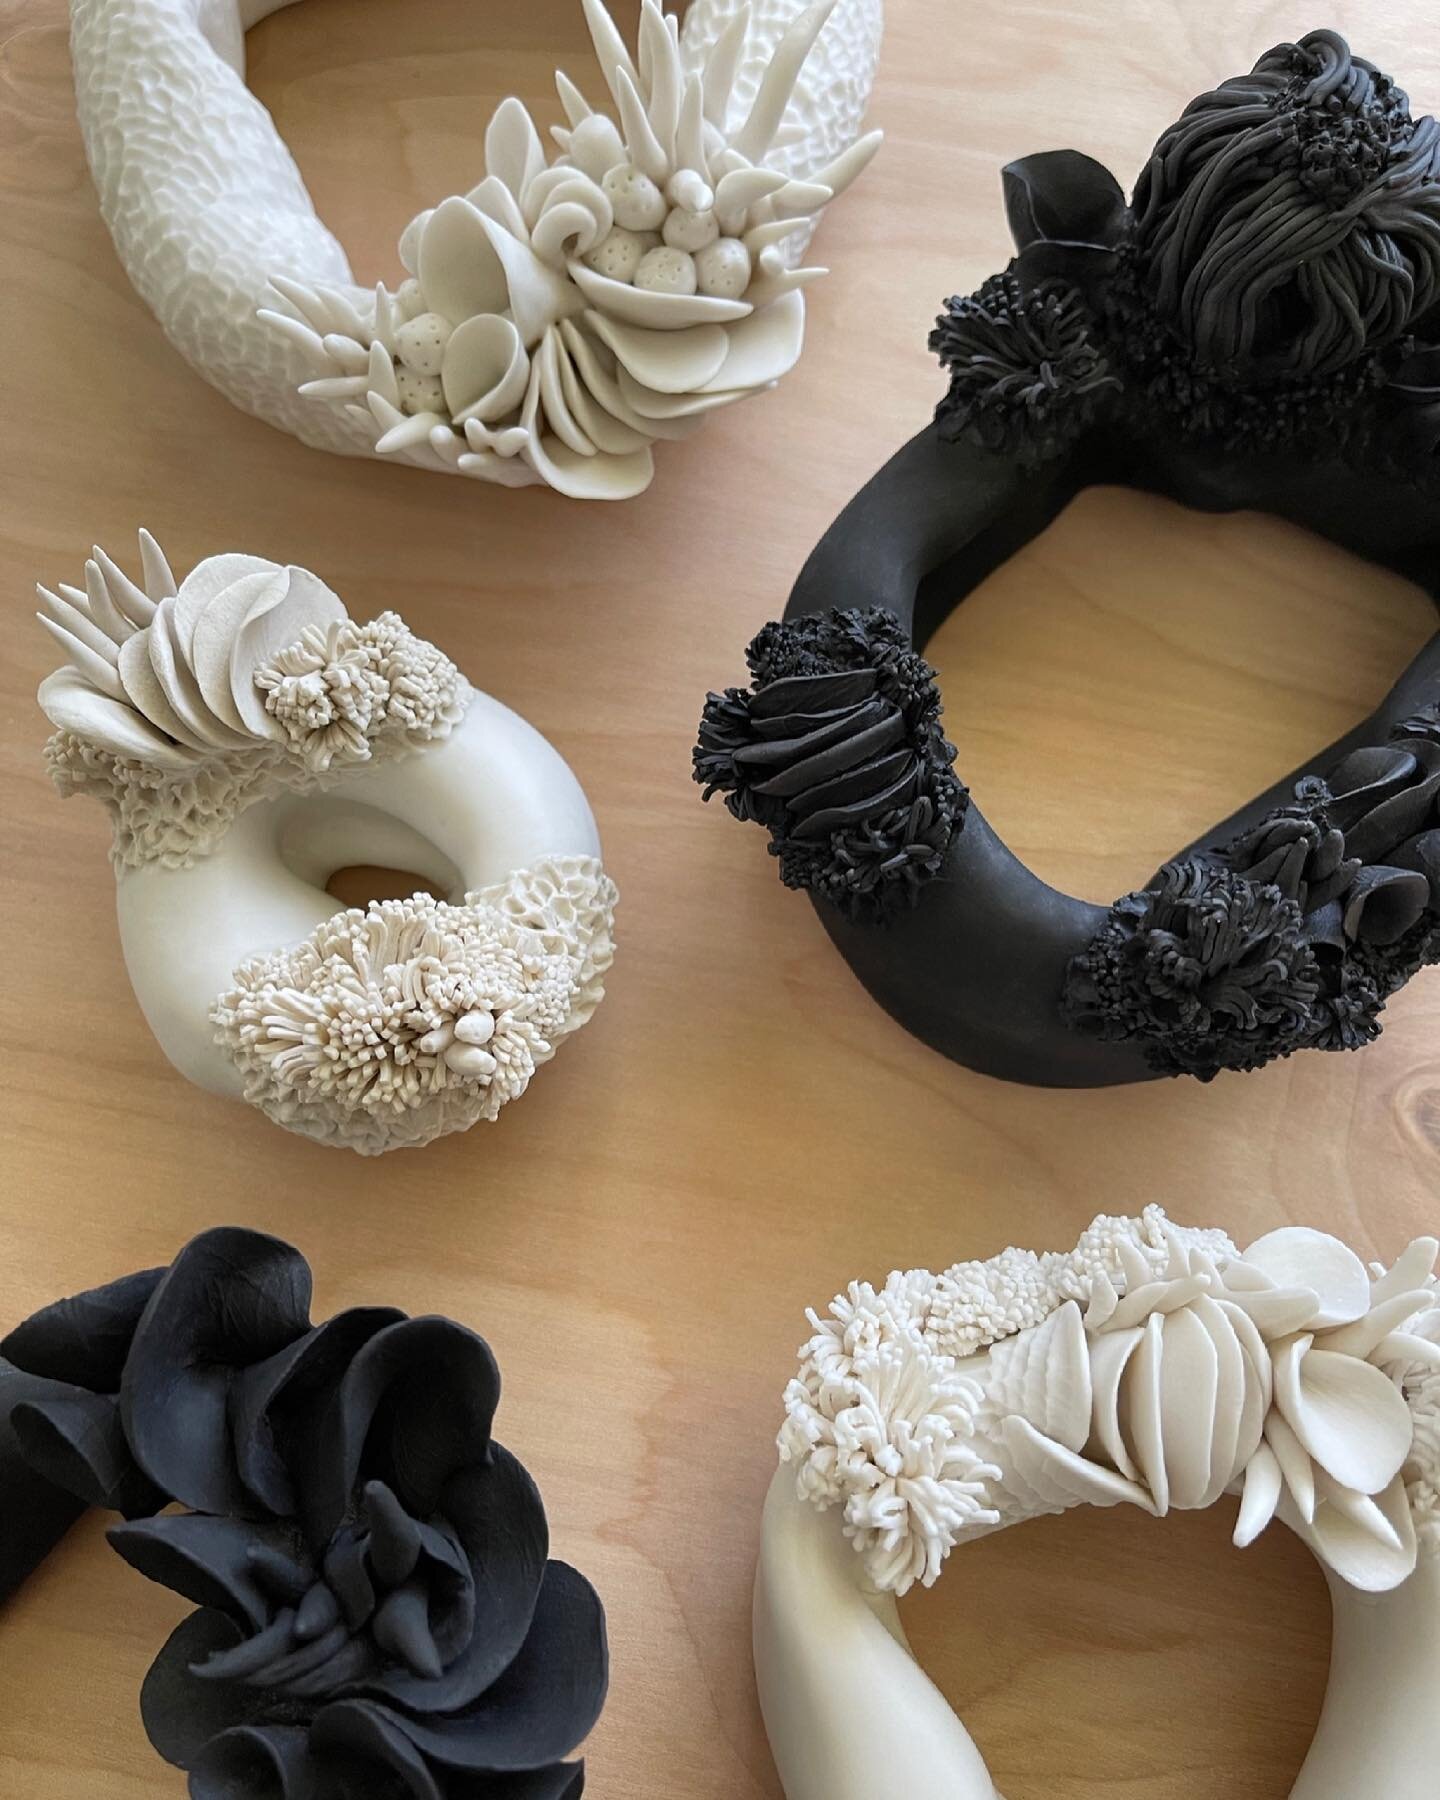 Seeing things in black and white: little porcelain worlds accumulating in the studio. #underthefloralspell
.
.
.
.
.
#porcelainlovers #myfloraljoys #studioceramics #studioporcelain #madeinatl #ceramicart #porcelainsculpture #contemporaryartcollector 